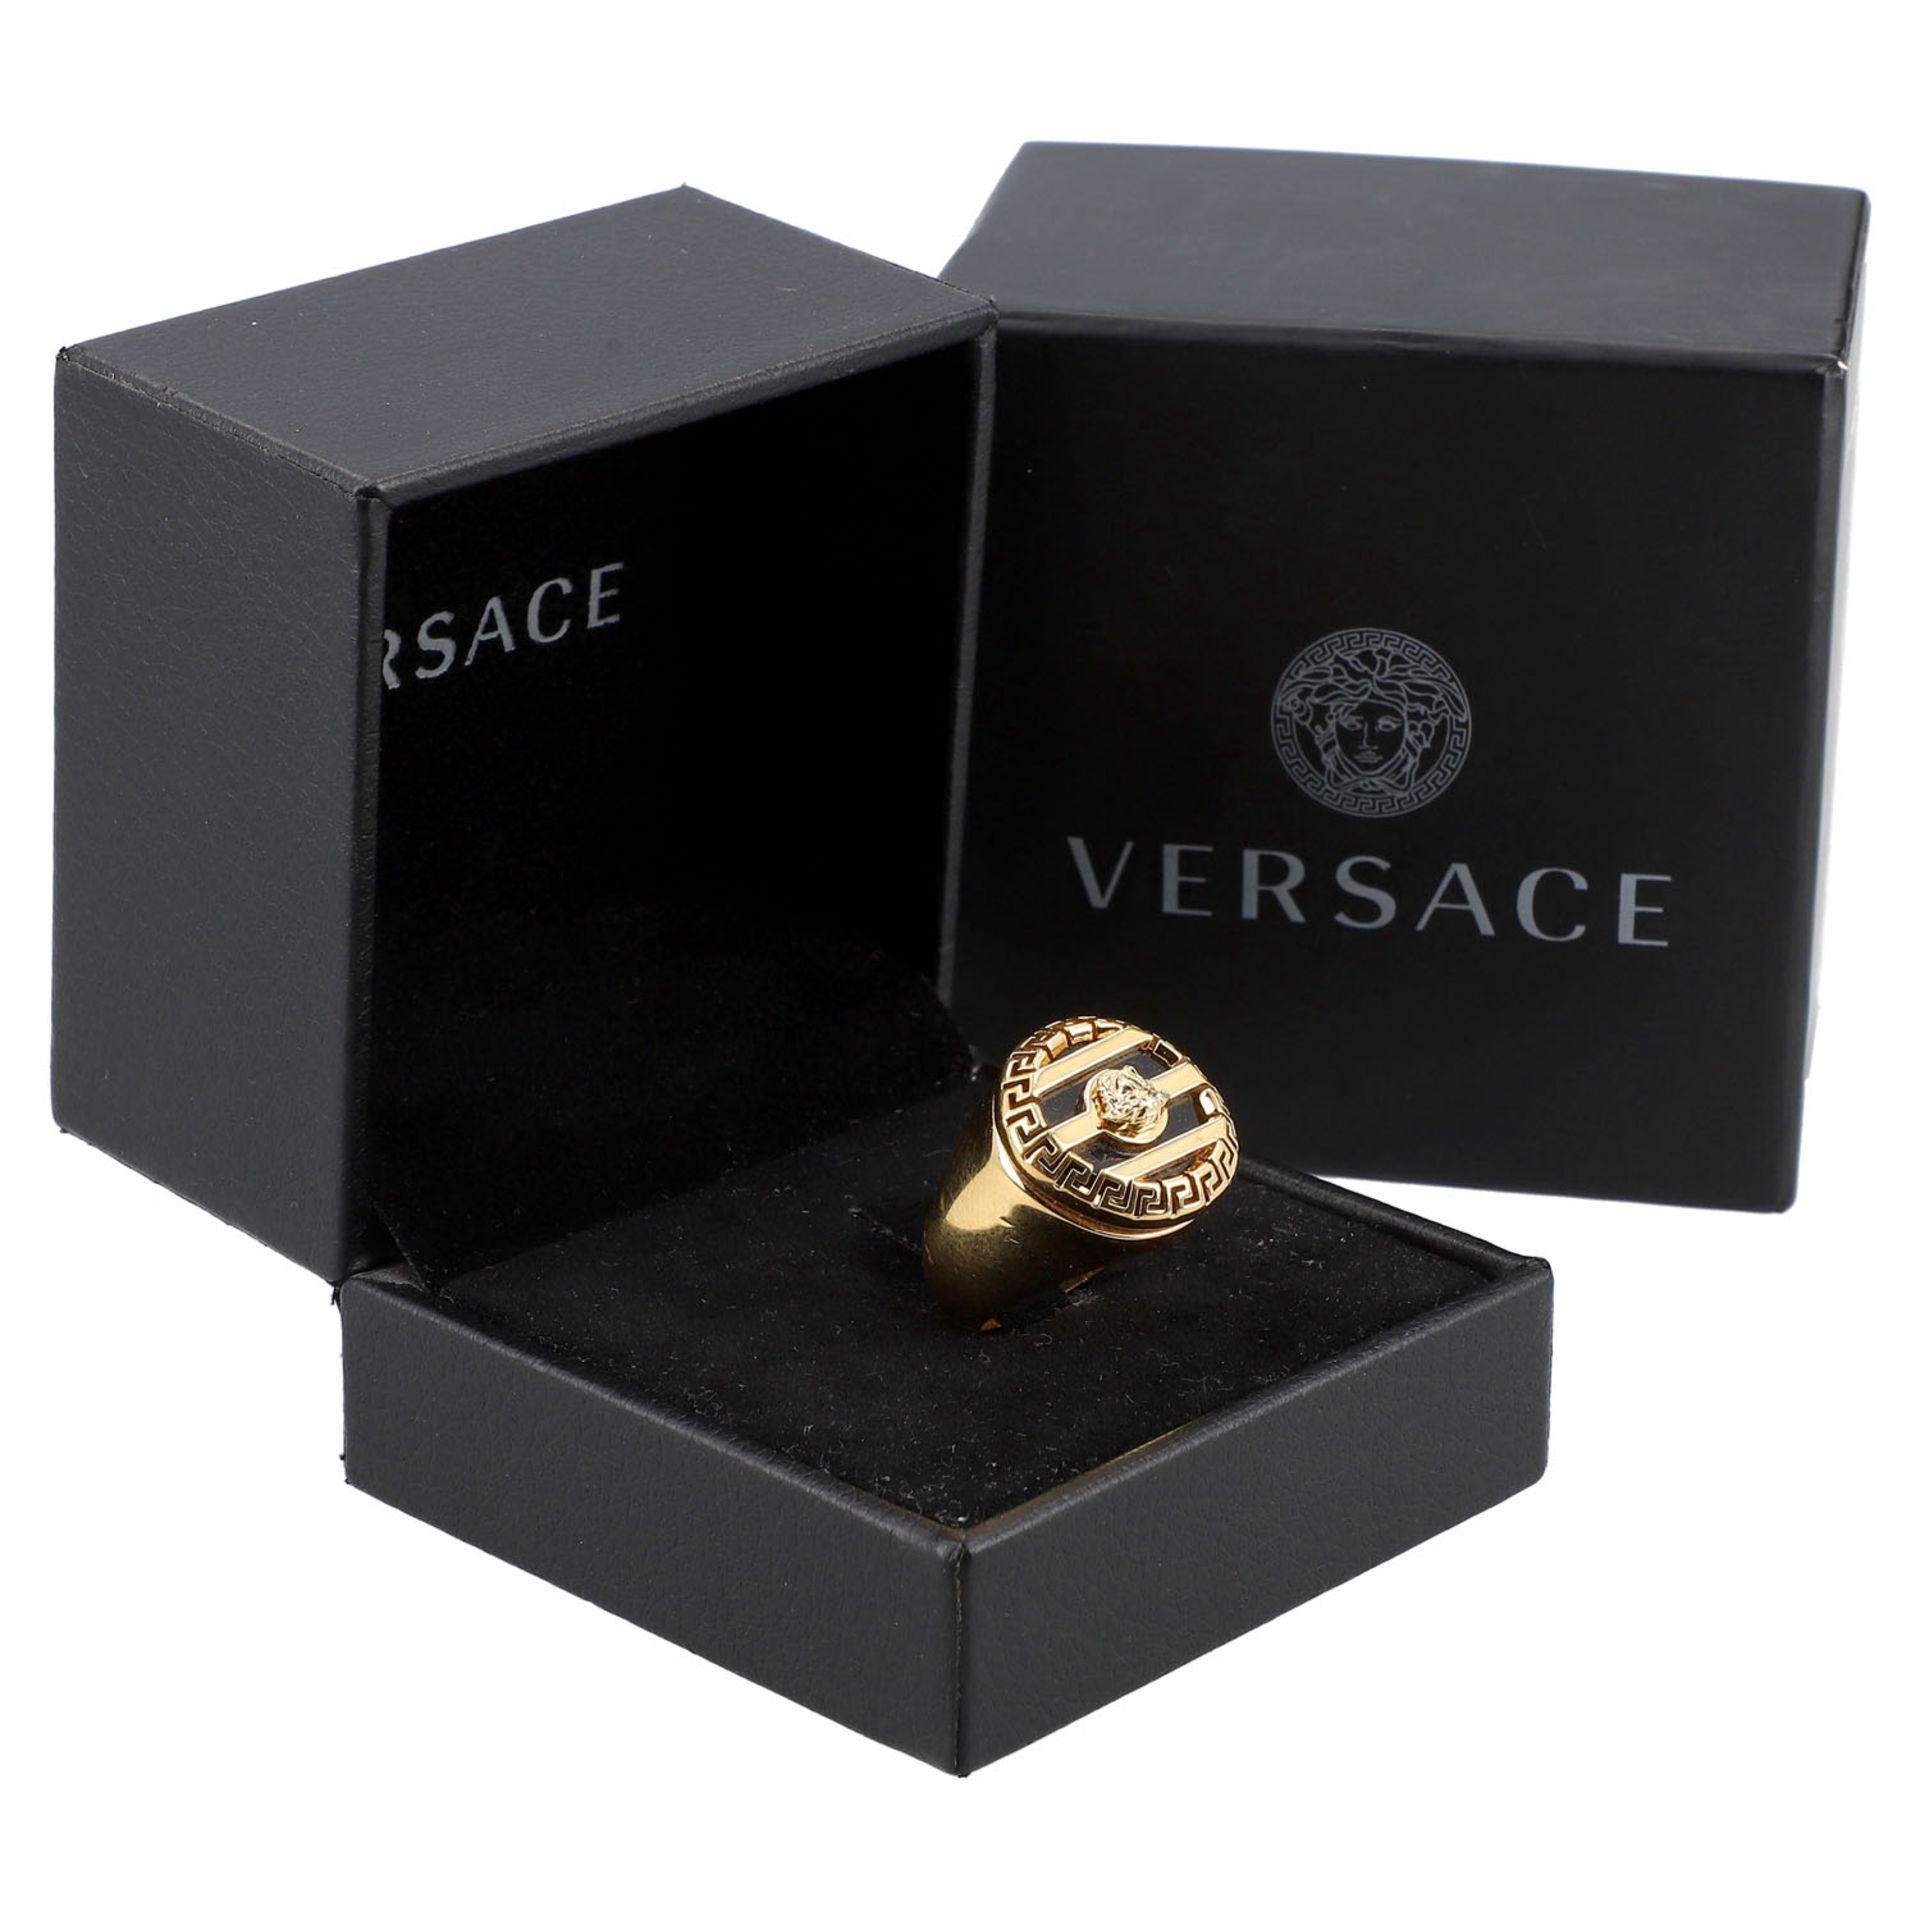 VERSACE Siegelring, NP.: 190,-€. - Image 5 of 5